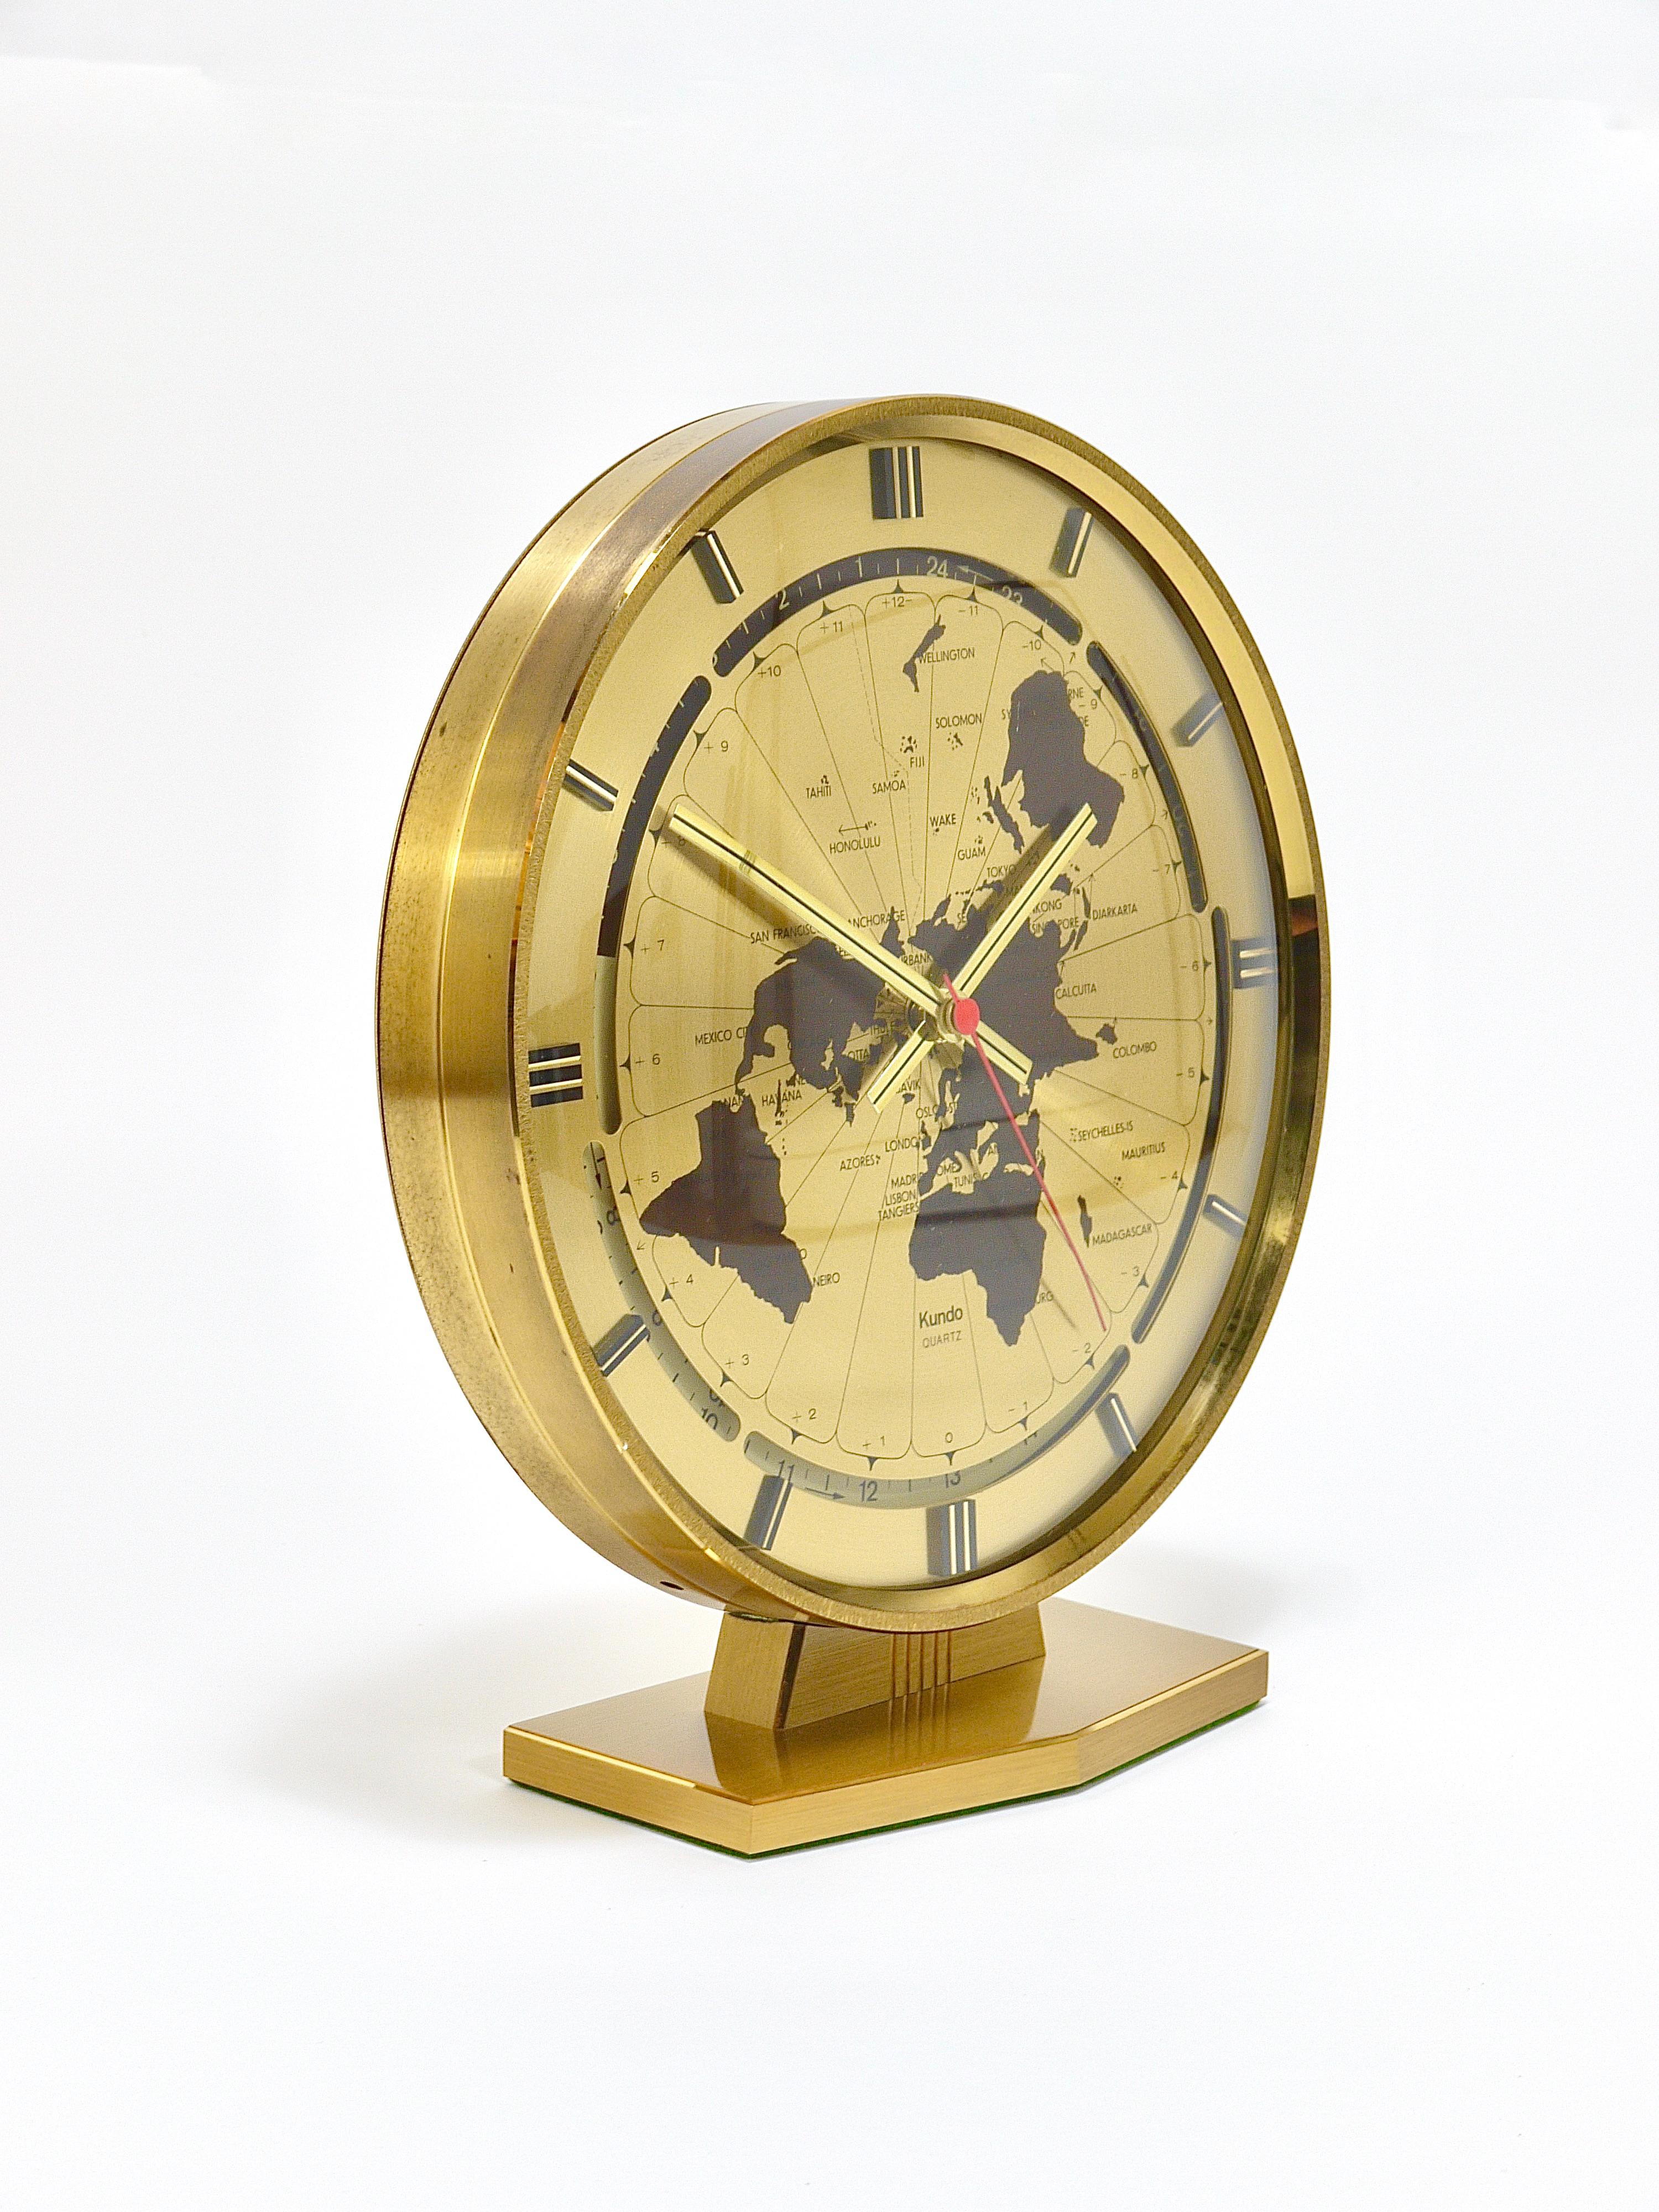 Mid-Century Modern Large Kundo GMT World Time Zone Brass Table Clock, Kieninger & Obergfell, 1960s For Sale